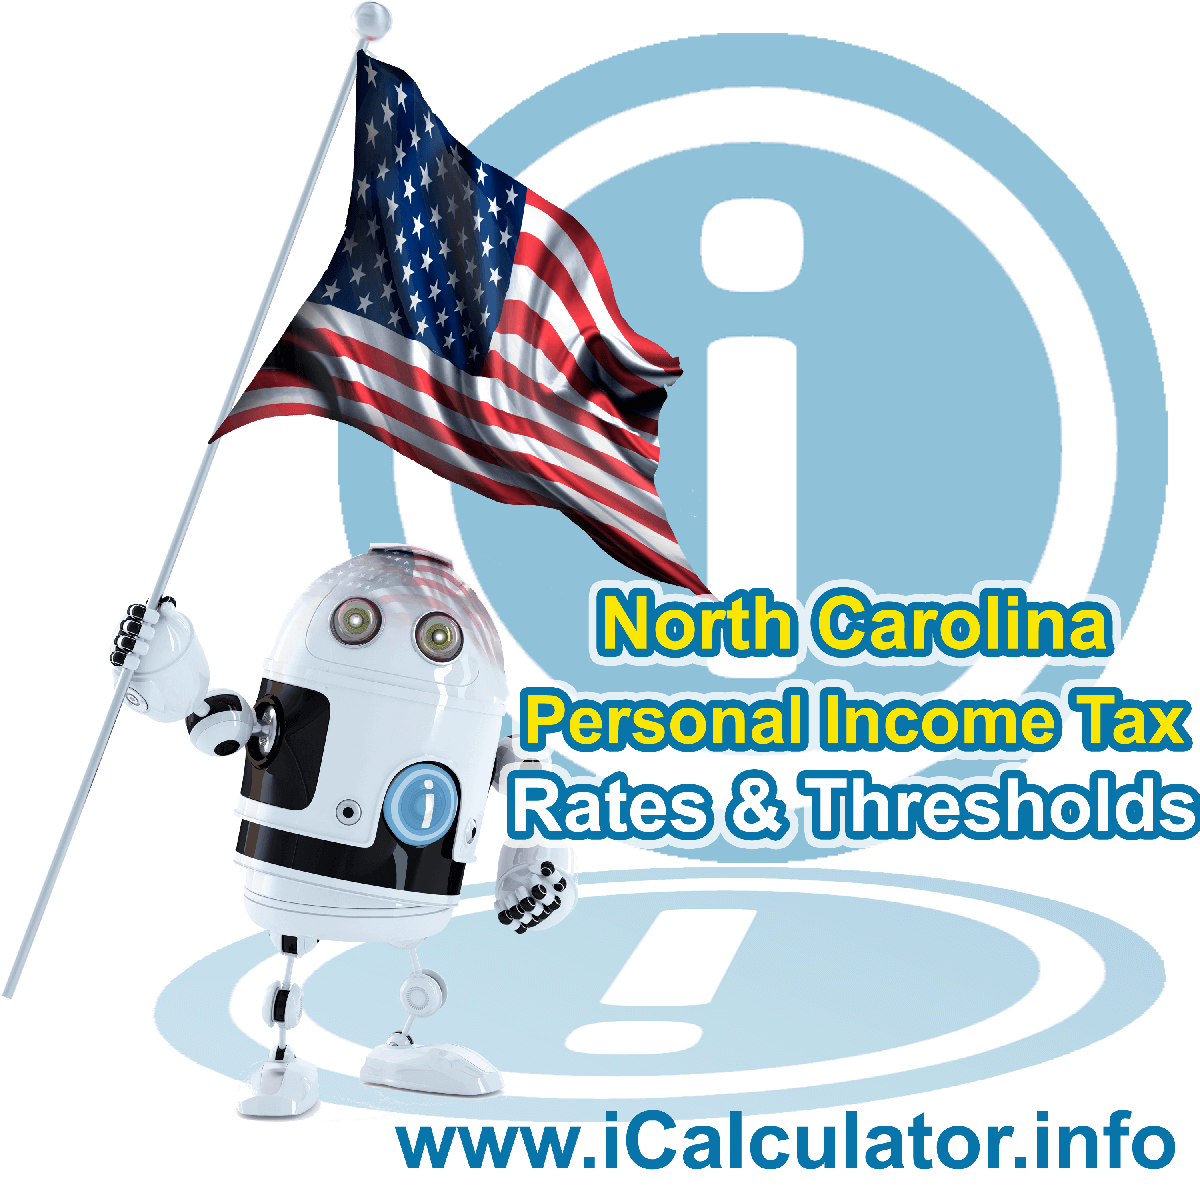 North Carolina State Tax Tables 2019. This image displays details of the North Carolina State Tax Tables for the 2019 tax return year which is provided in support of the 2019 US Tax Calculator